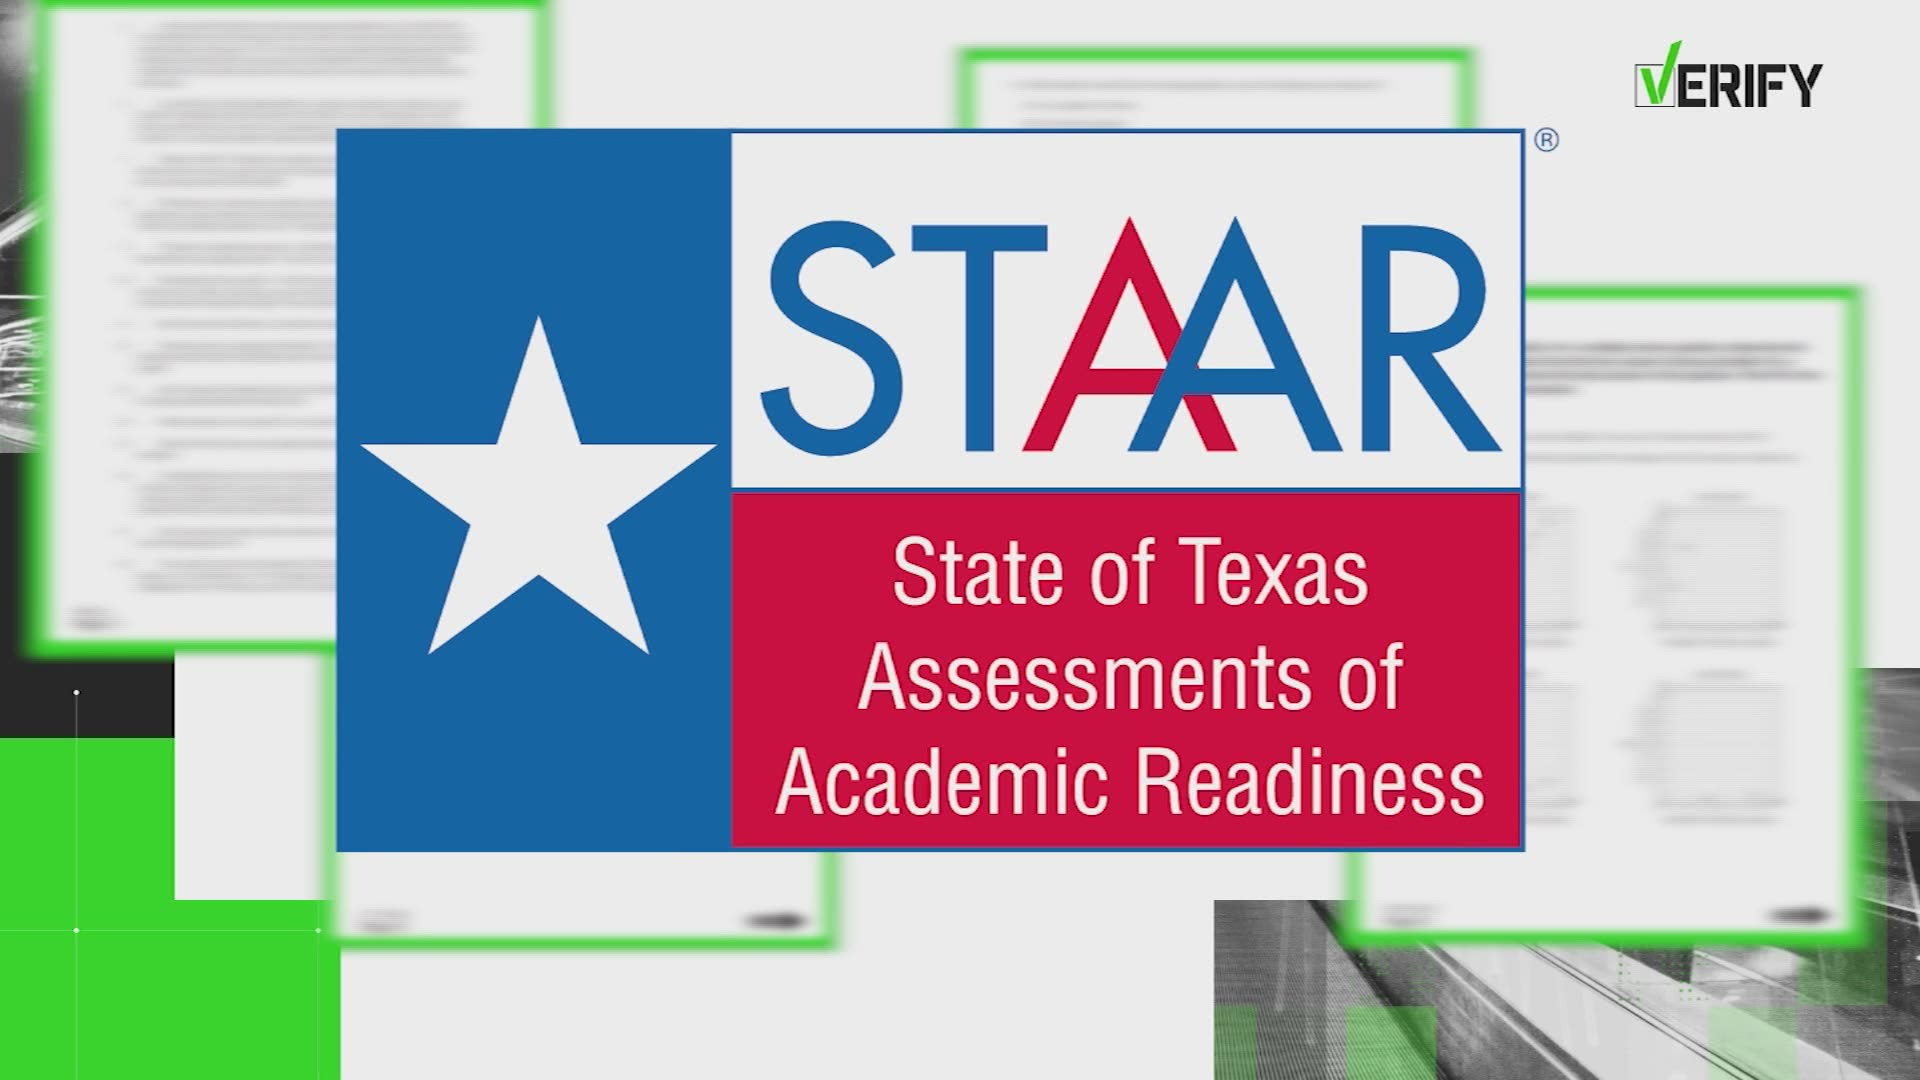 Did Texas have the option to opt out of STAAR testing this year